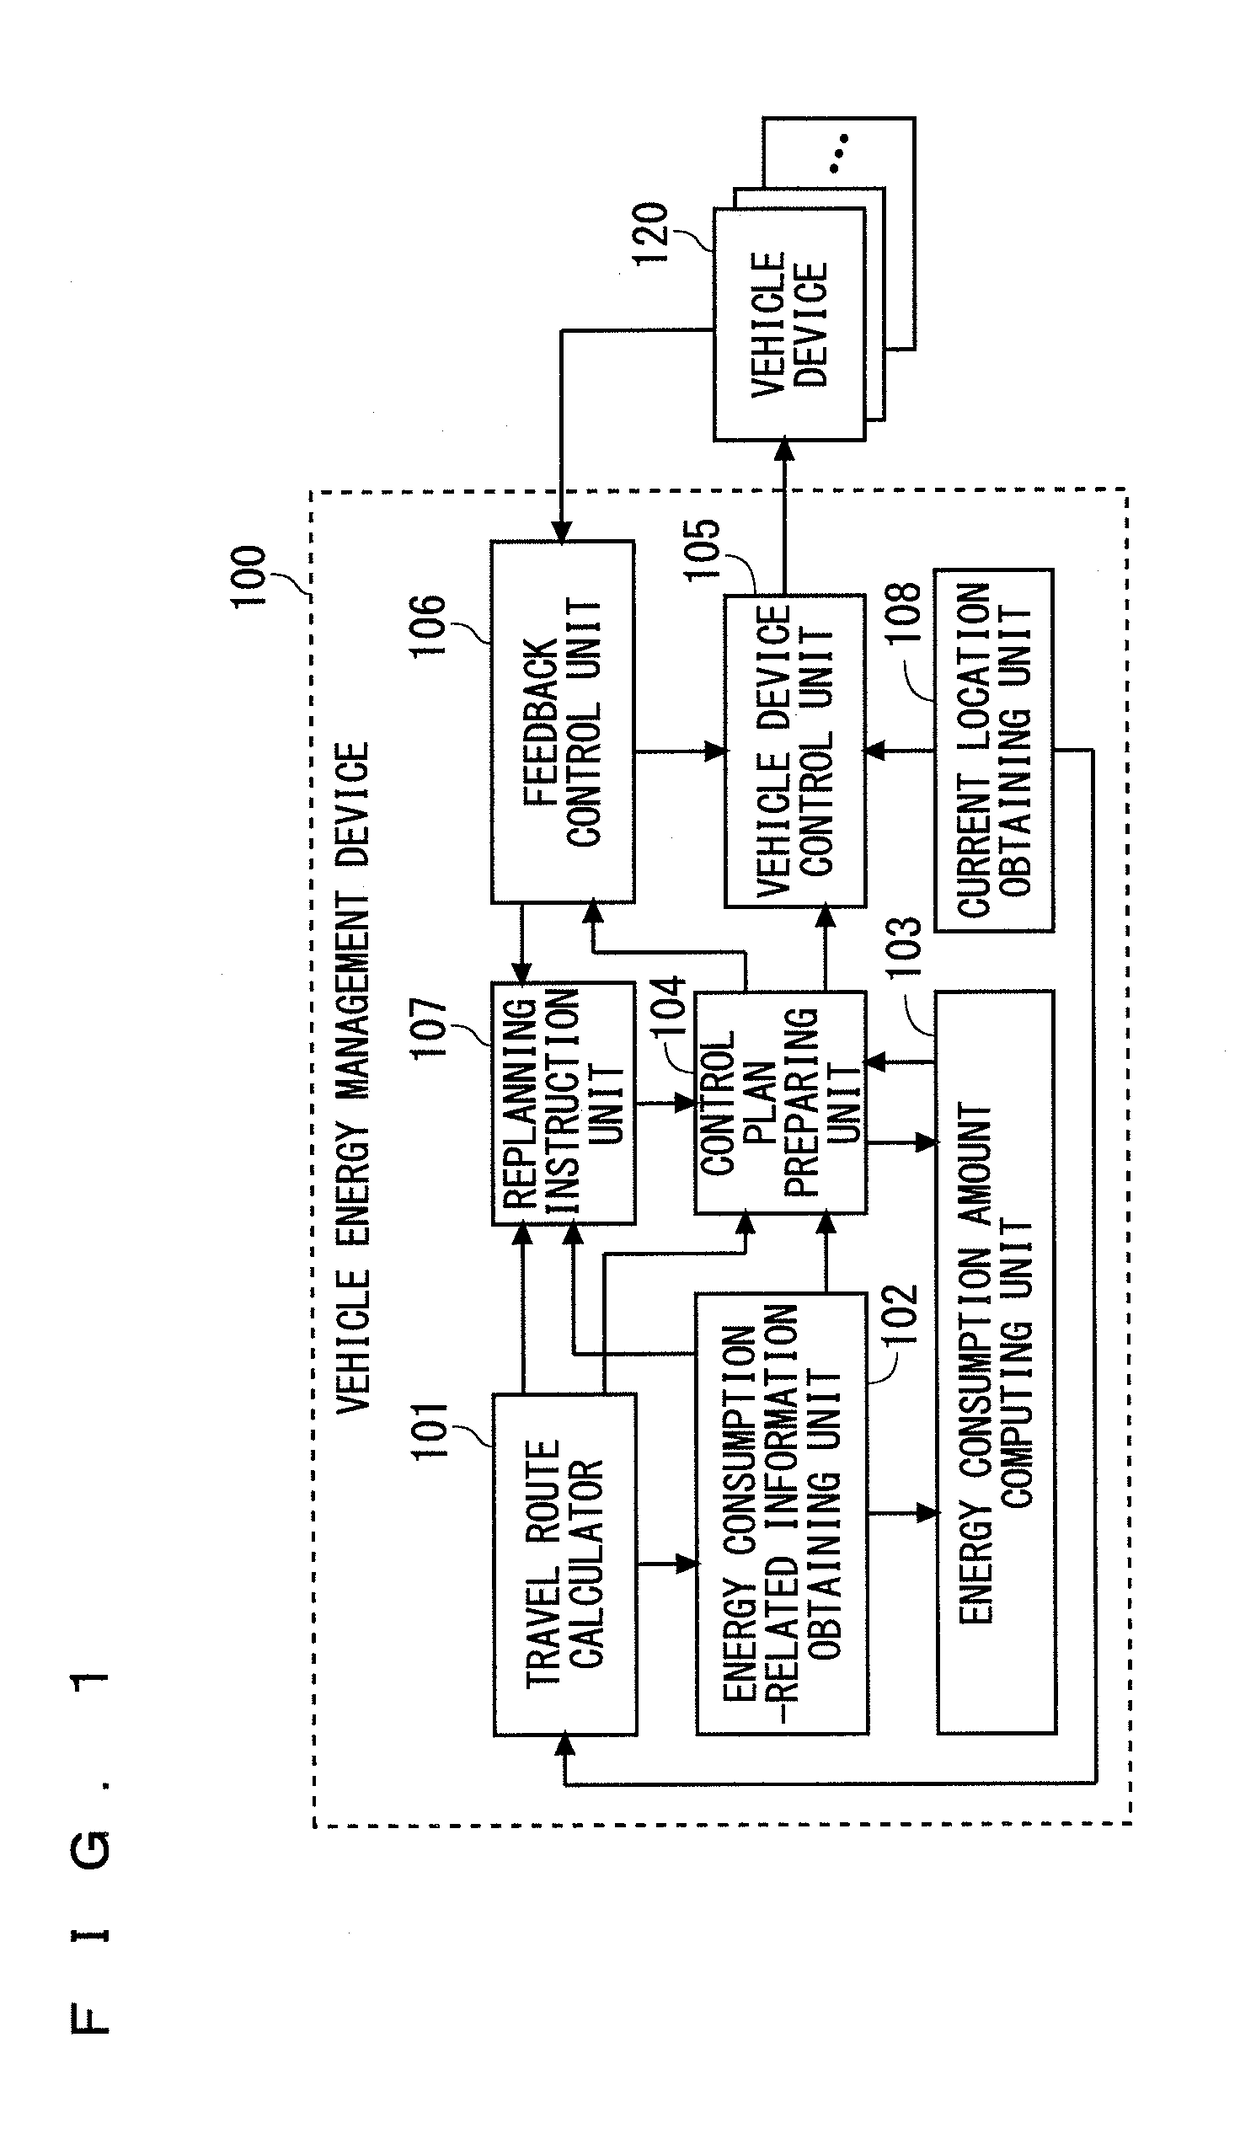 Energy management device for a vehicle having a plurality of different energy sources